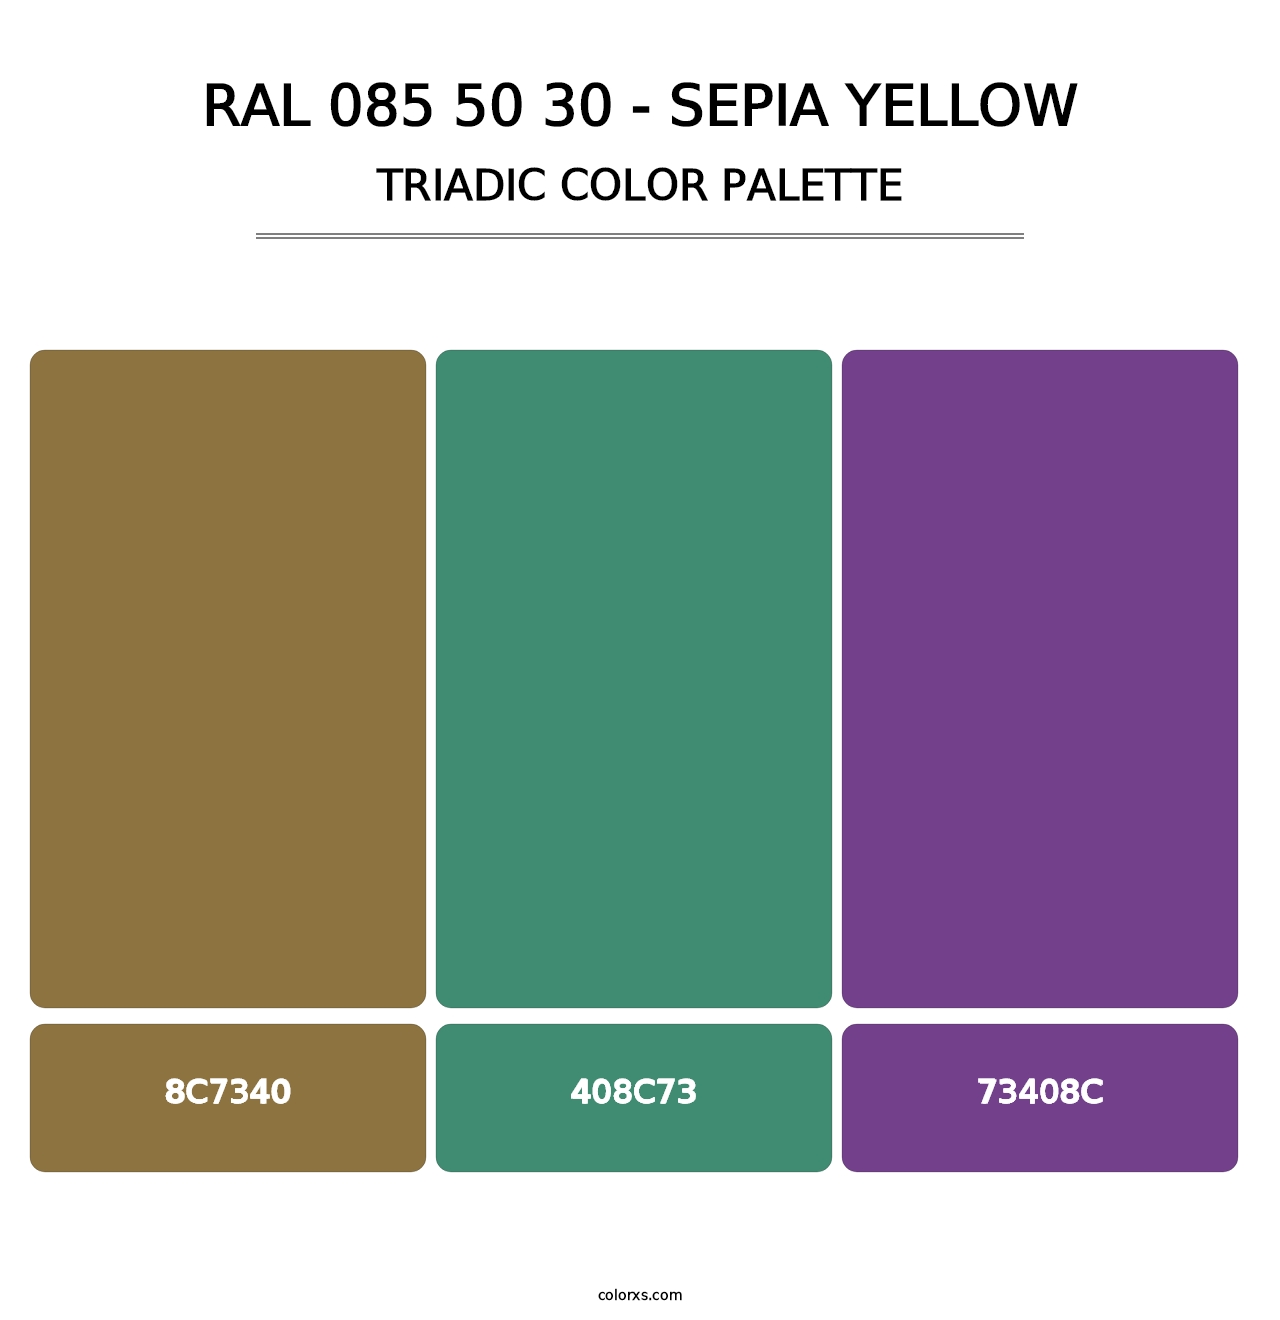 RAL 085 50 30 - Sepia Yellow - Triadic Color Palette